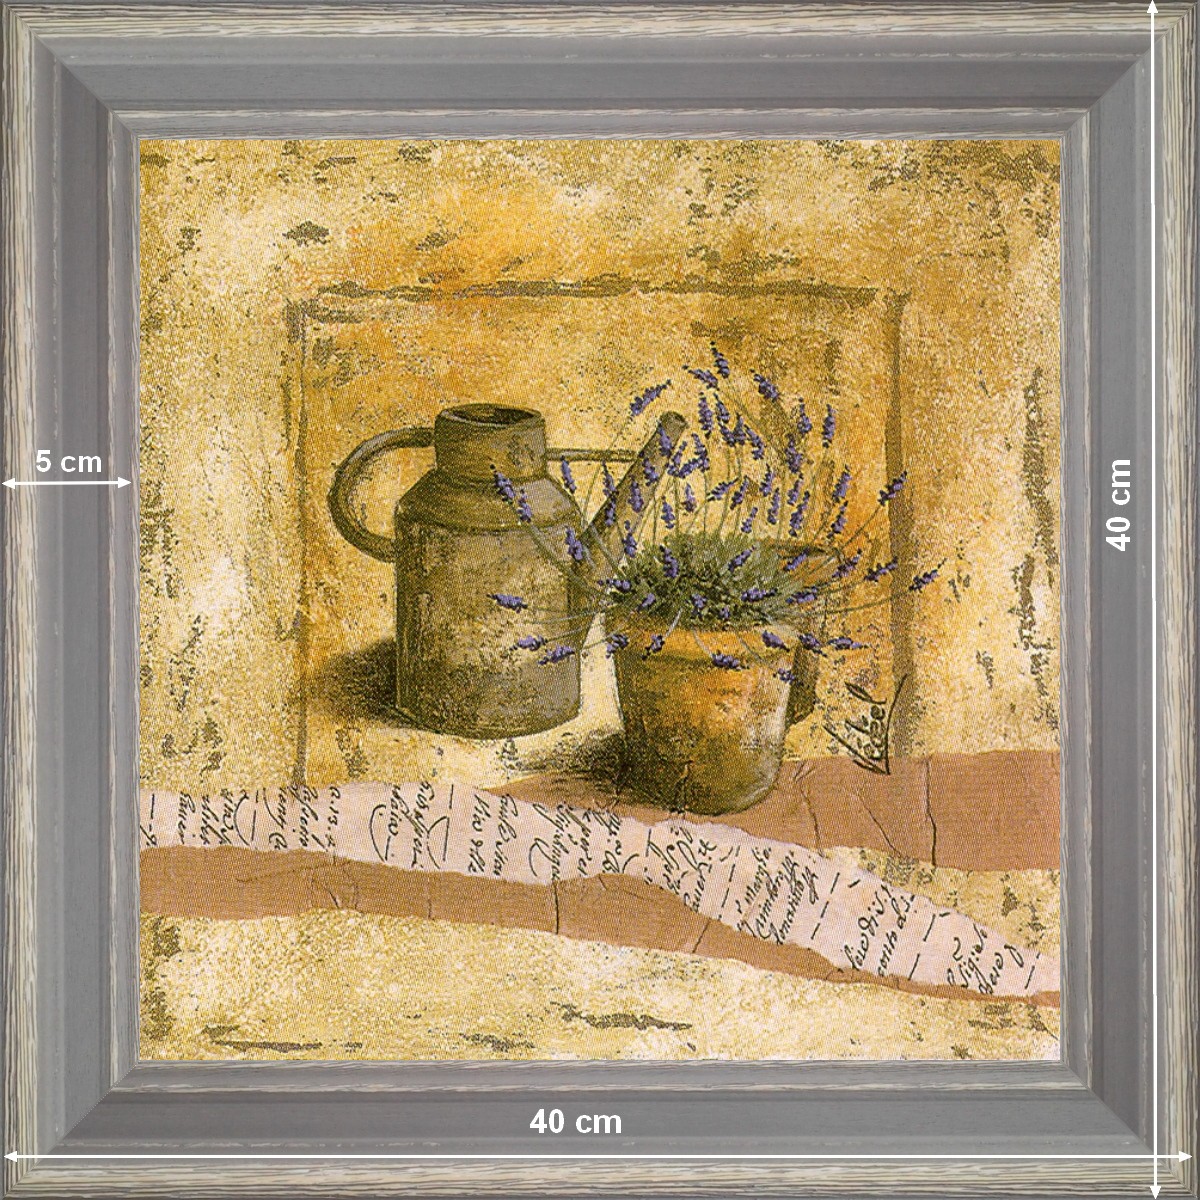 Watering-can and pot of lavender - dimension 40 x 40 cm - Grey